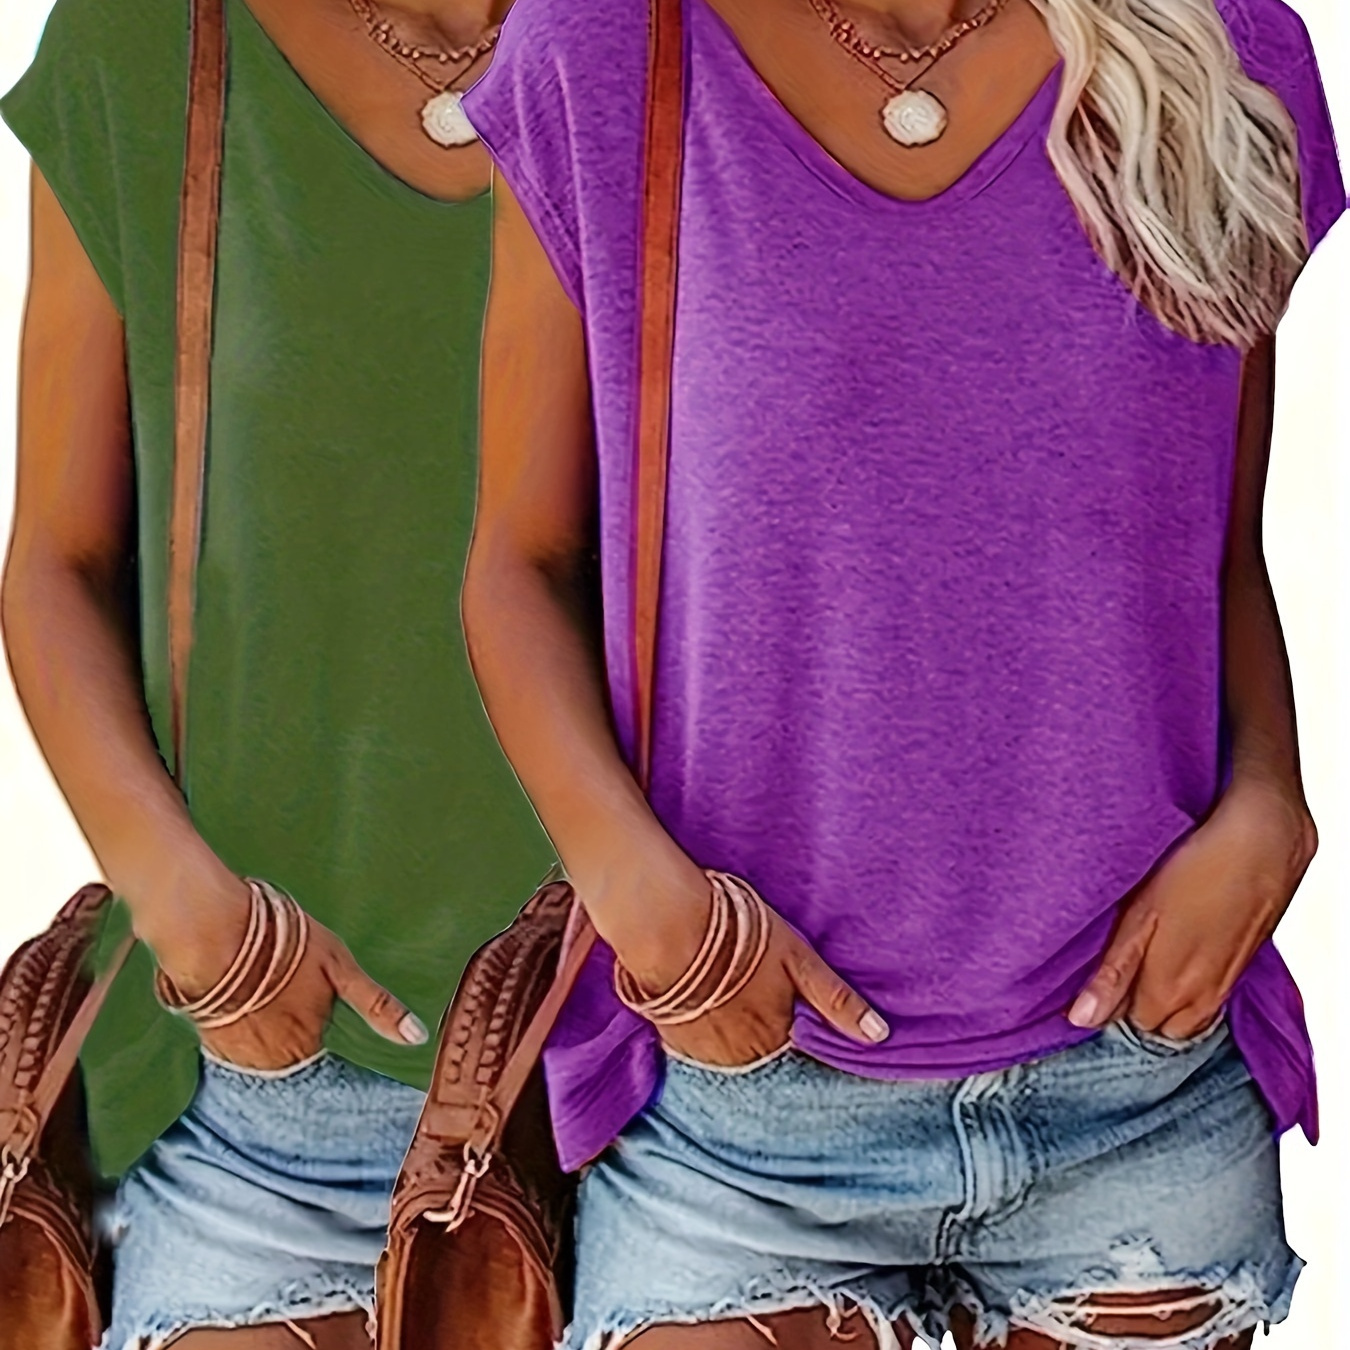 

Women's Casual V-neck Knitted T-shirt 2-pack, Athletic Style, Machine Washable, Semi-sheer, Summer Wear